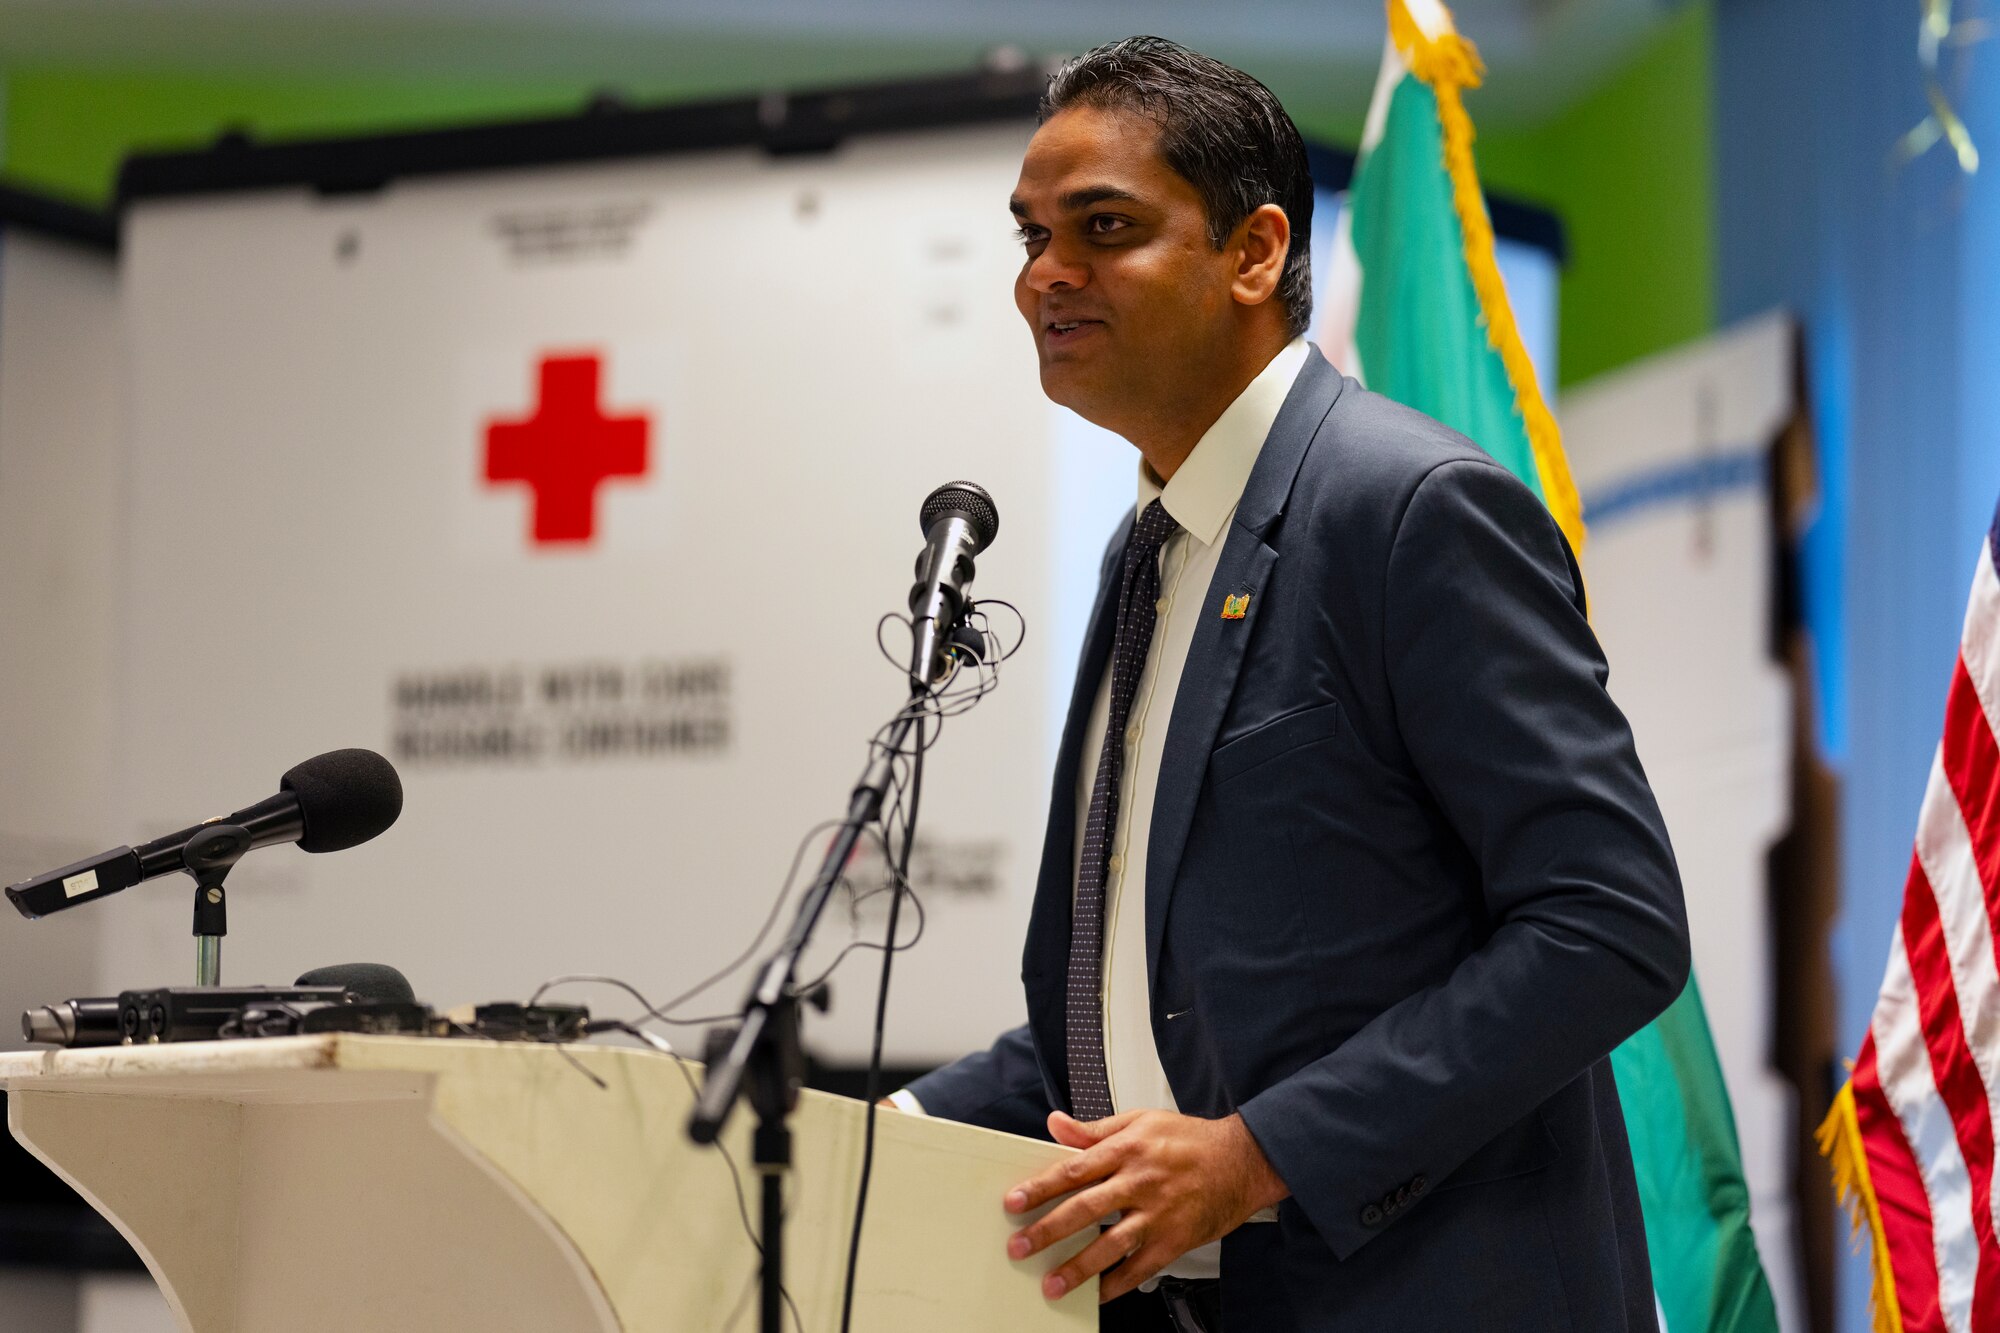 Dr. Amar Ramadhin, Suriname minister of health gives remarks during a closing ceremony for the Lesser Antilles Medical Assistance Team mission at the Academic Hospital in Suriname, Feb. 28, 2024. The nearly two-week U.S. Southern Command backed operation helped approximately 1,500 patients and brought 159 hours of education and discussions through teaching seminars. (U.S. Air Force photo by Tech. Sgt. Rachel Maxwell)